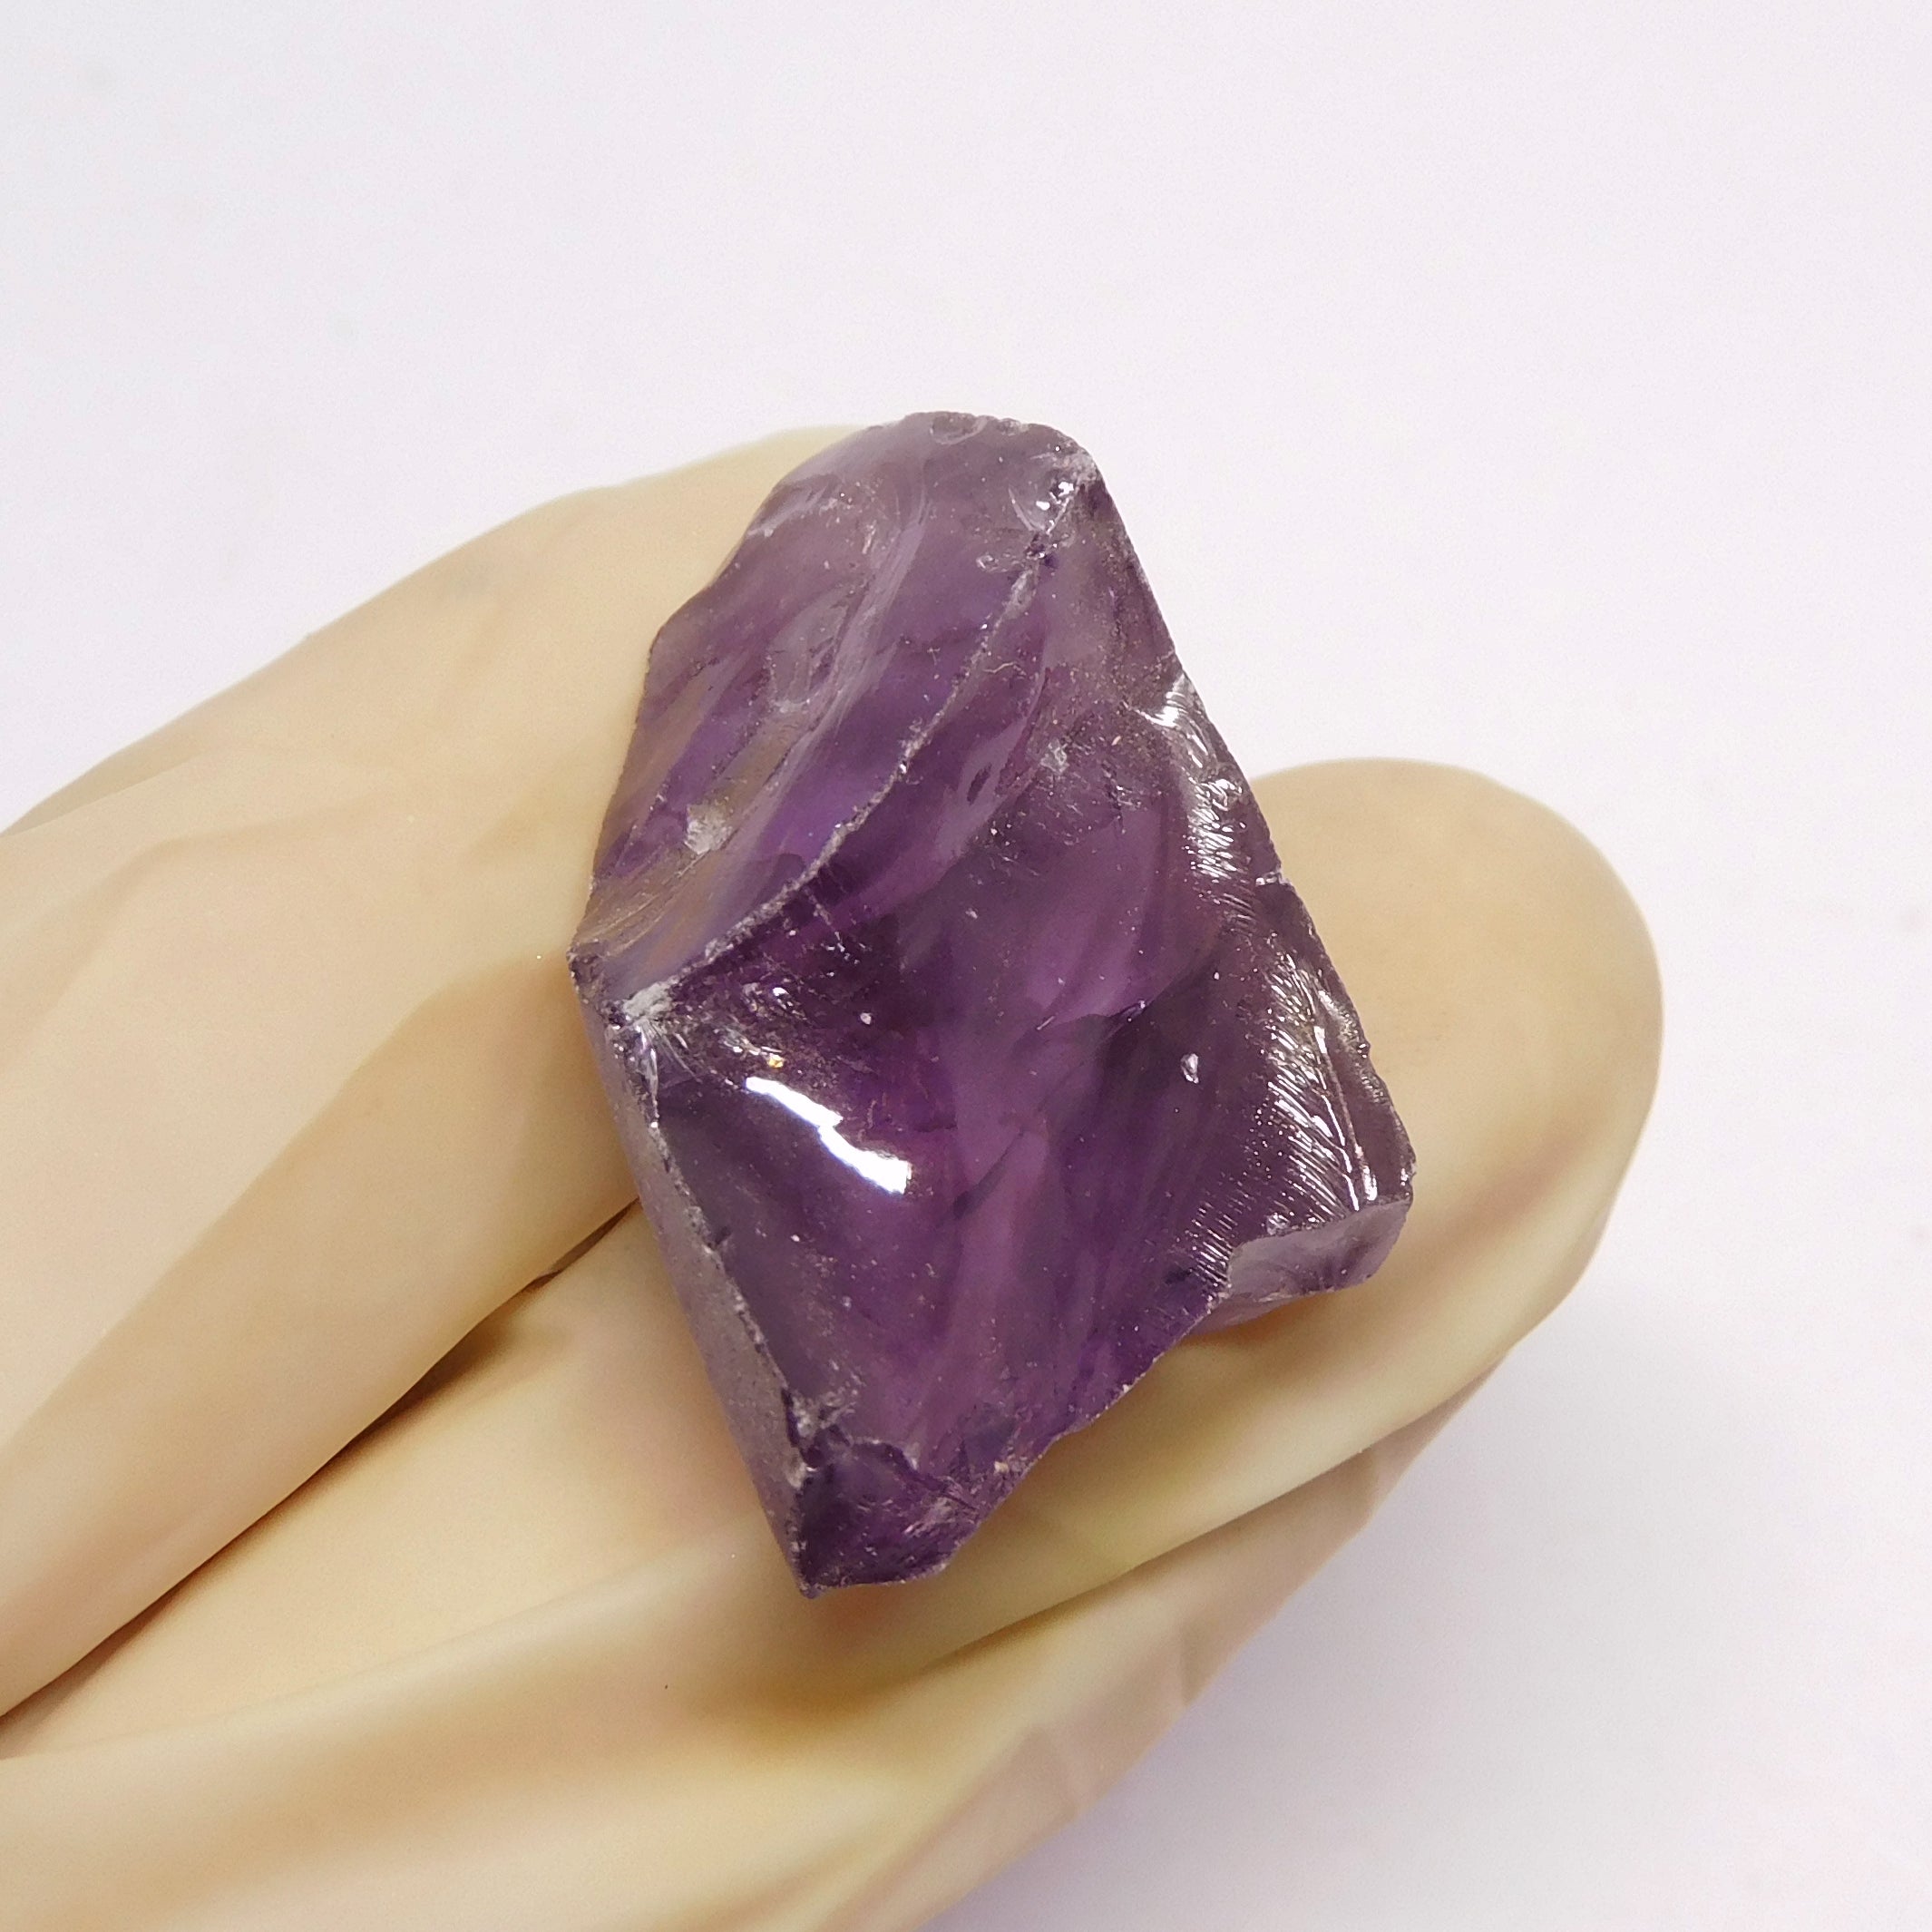 Excellent Quality | Free Shipping Free Gift | Rough Raw 40.05 Carat Natural Color Change Alexandrite Huge Size Rough Loose Gemstone Certified